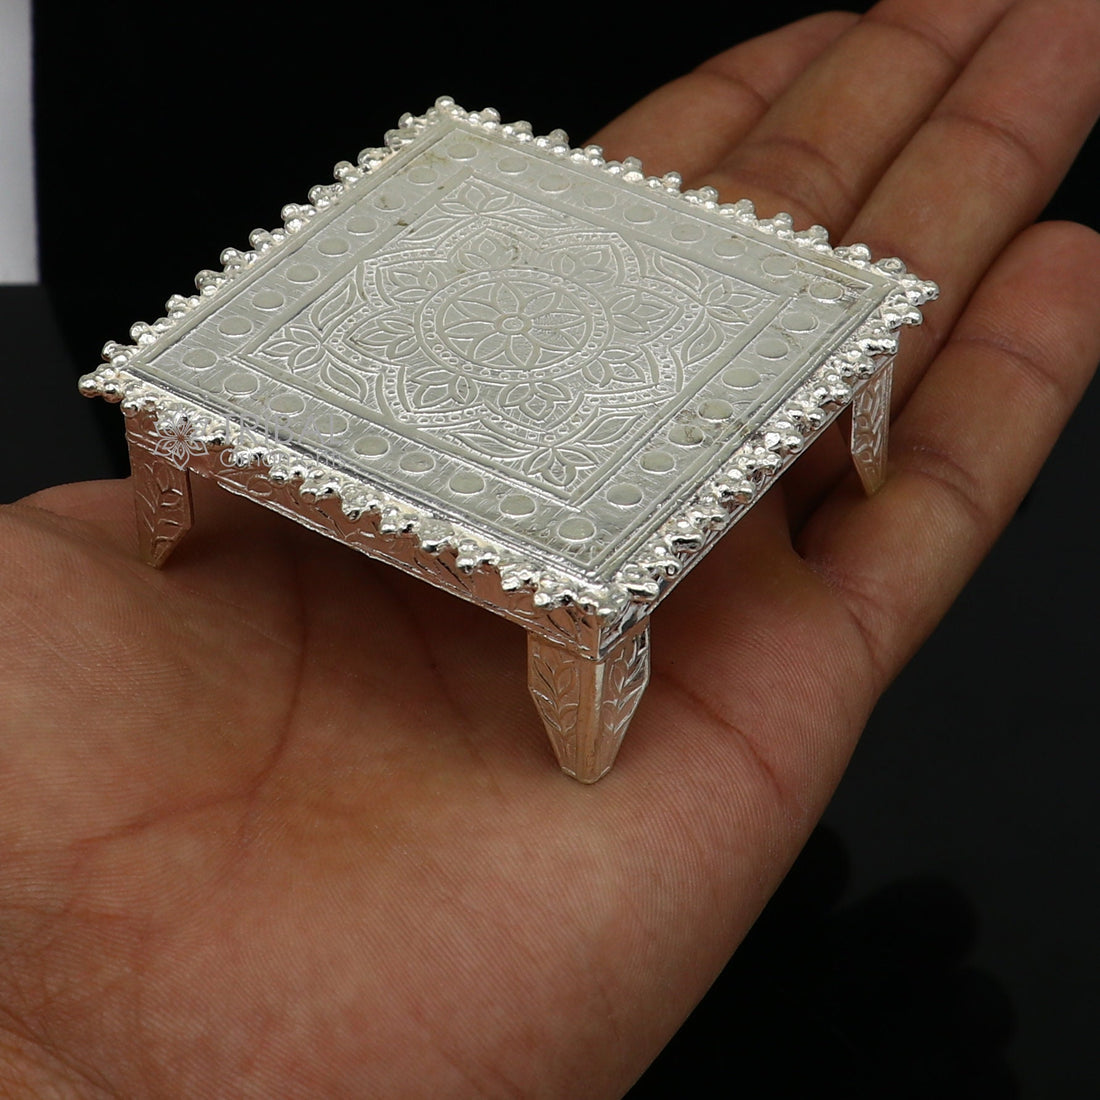 2.4" x 2.4" 925 Sterling silver handmade customize small square shape table/bazot/chouki, excellent home puja utensils temple art su1199 - TRIBAL ORNAMENTS